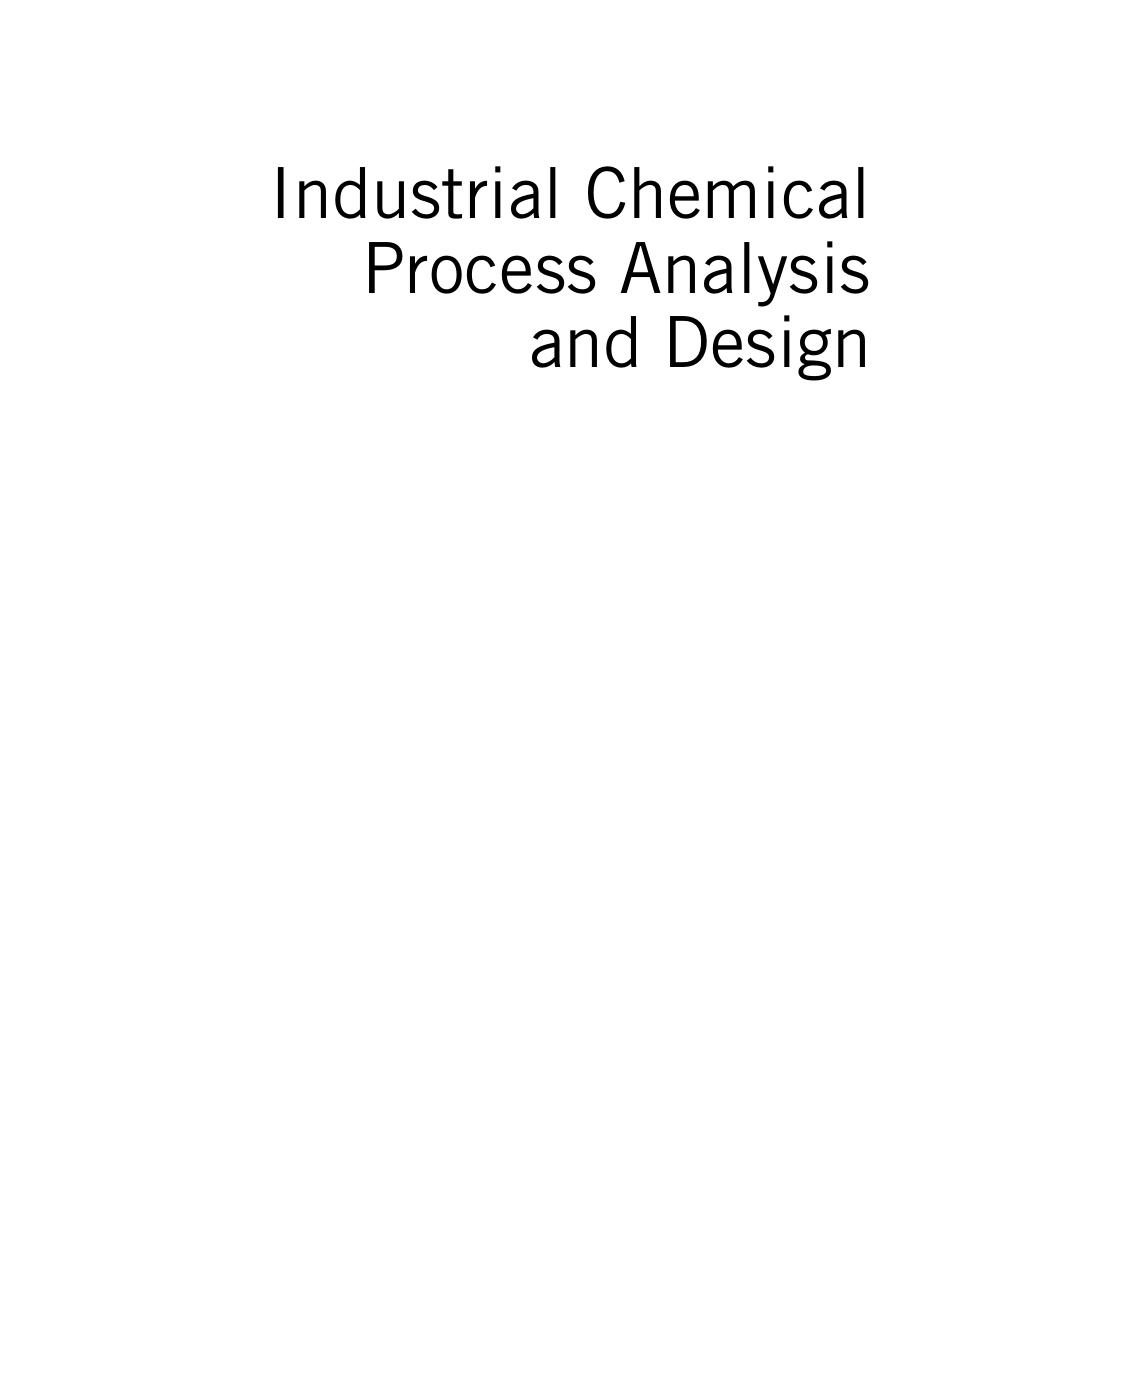 Industrial Chemical Process Analysis and Design 2016